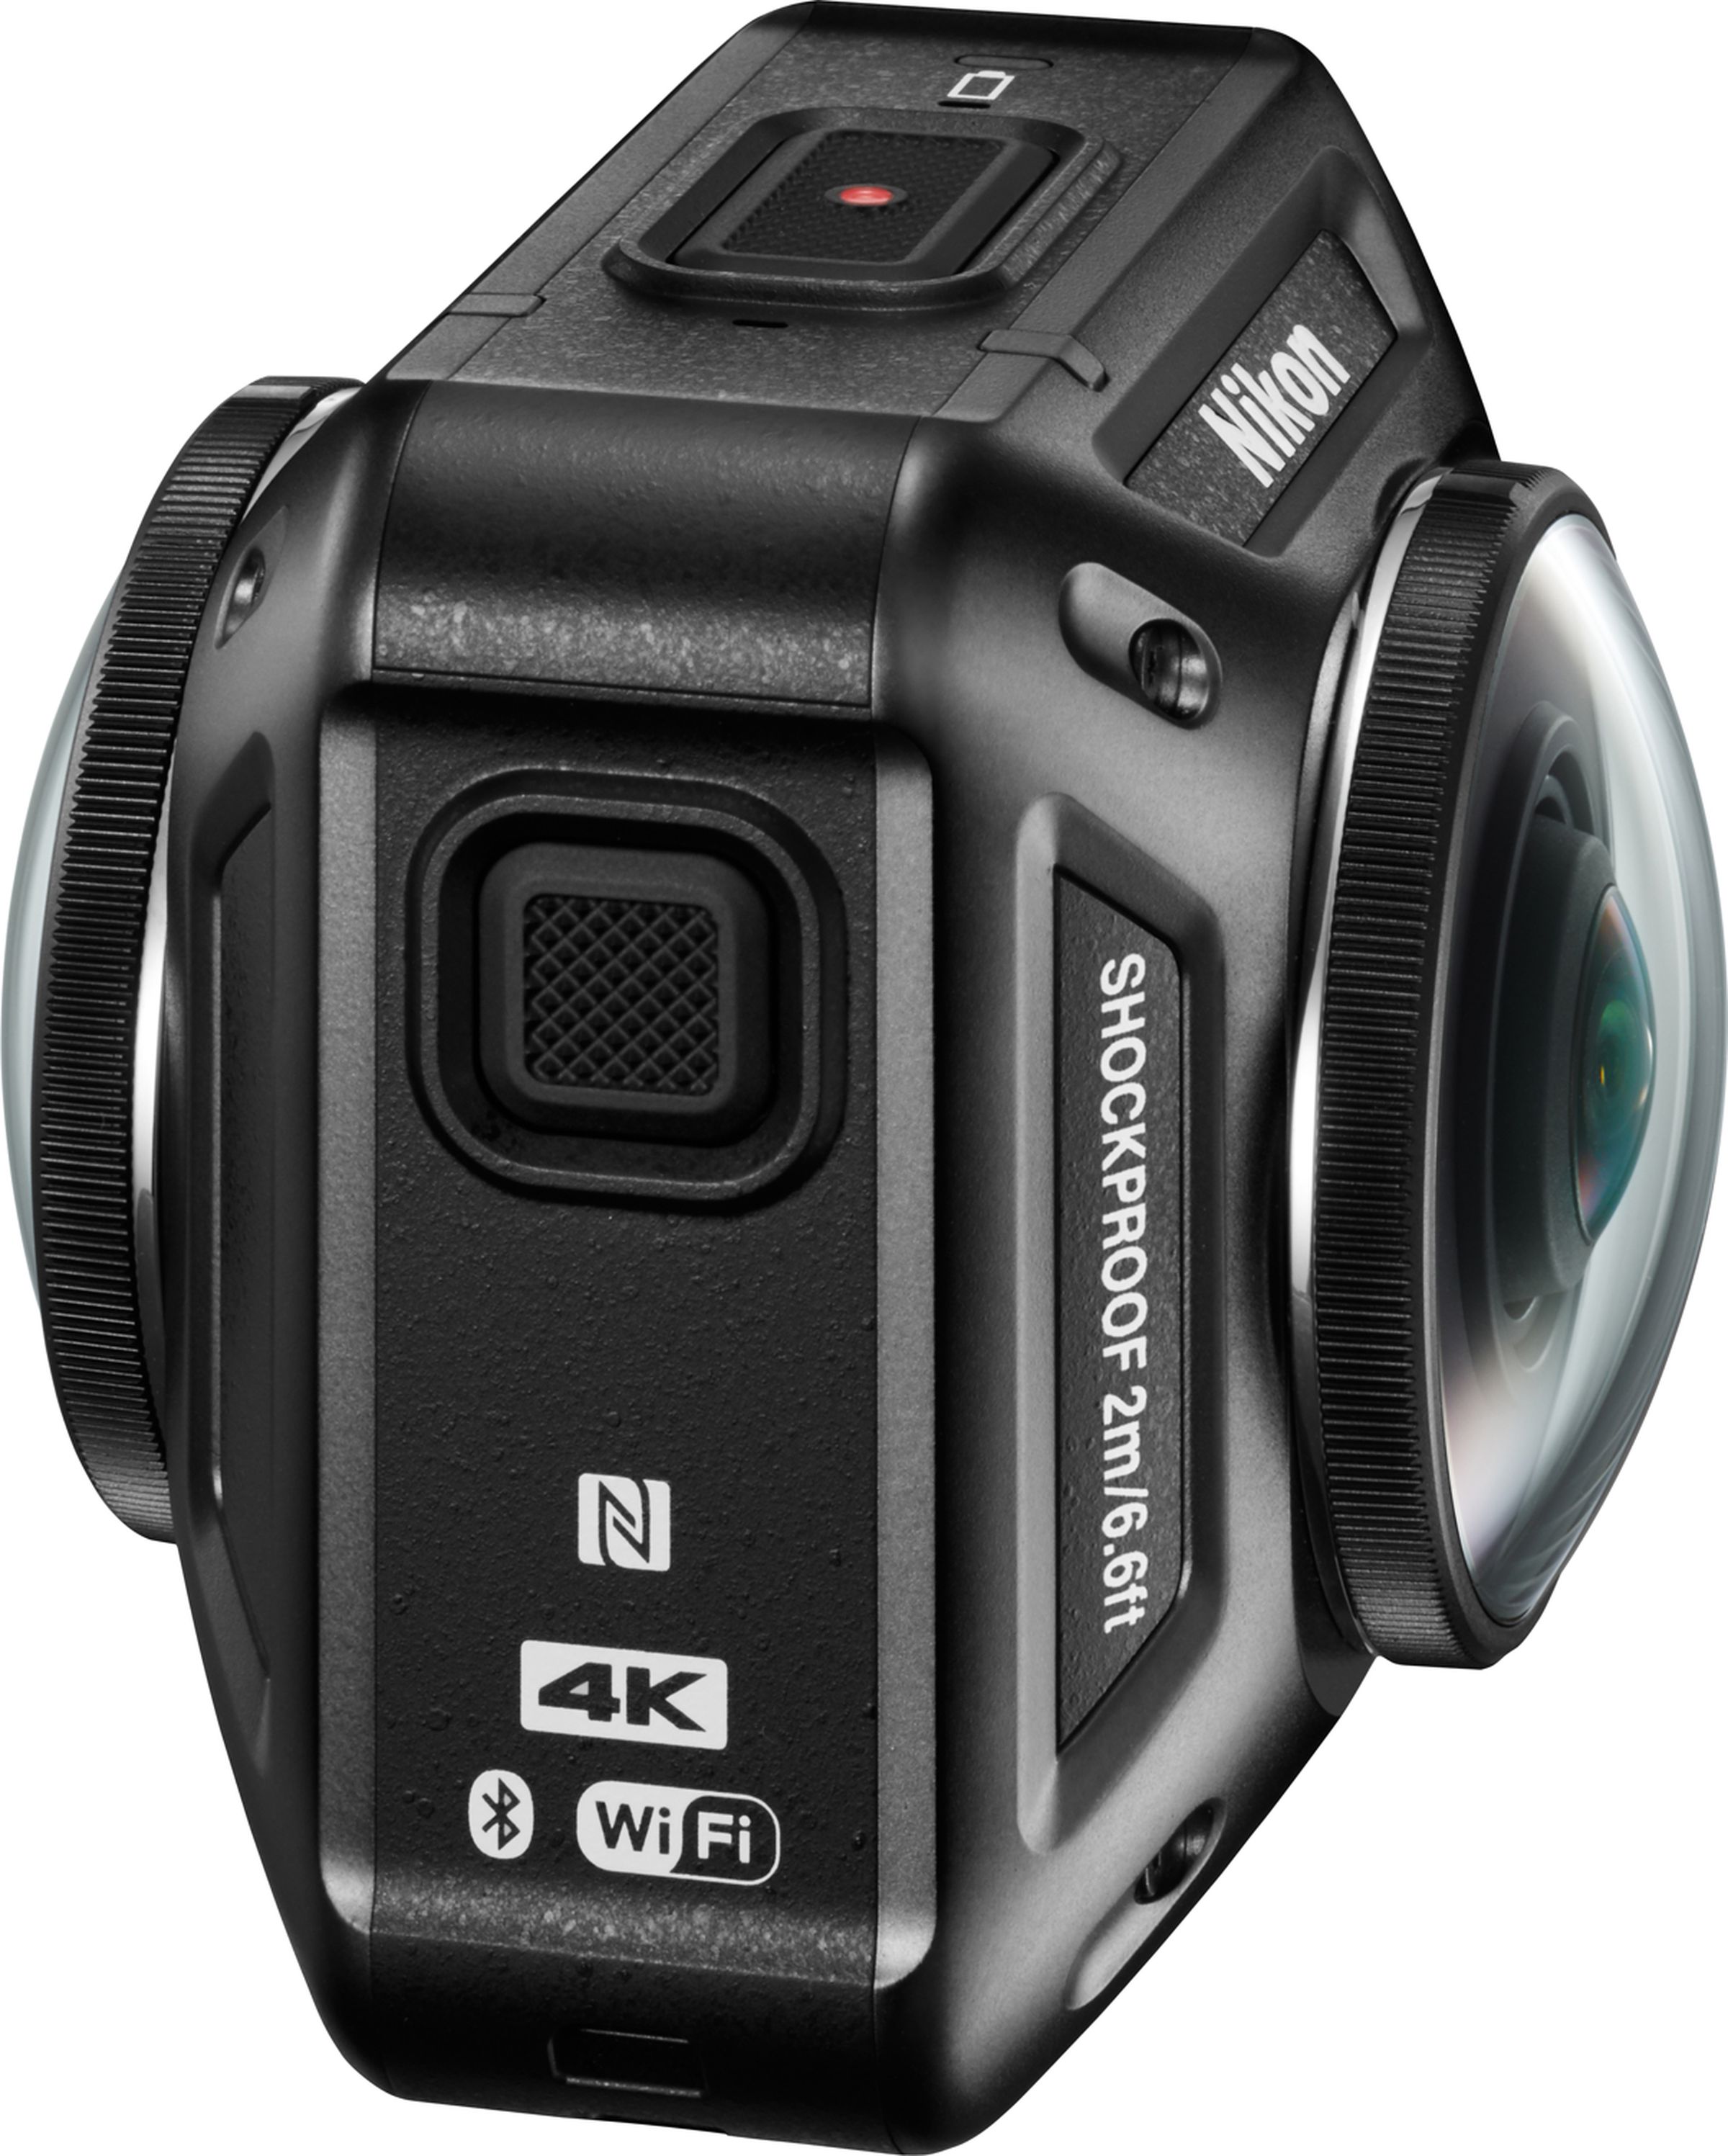 Nikon's KeyMission action cameras in photos